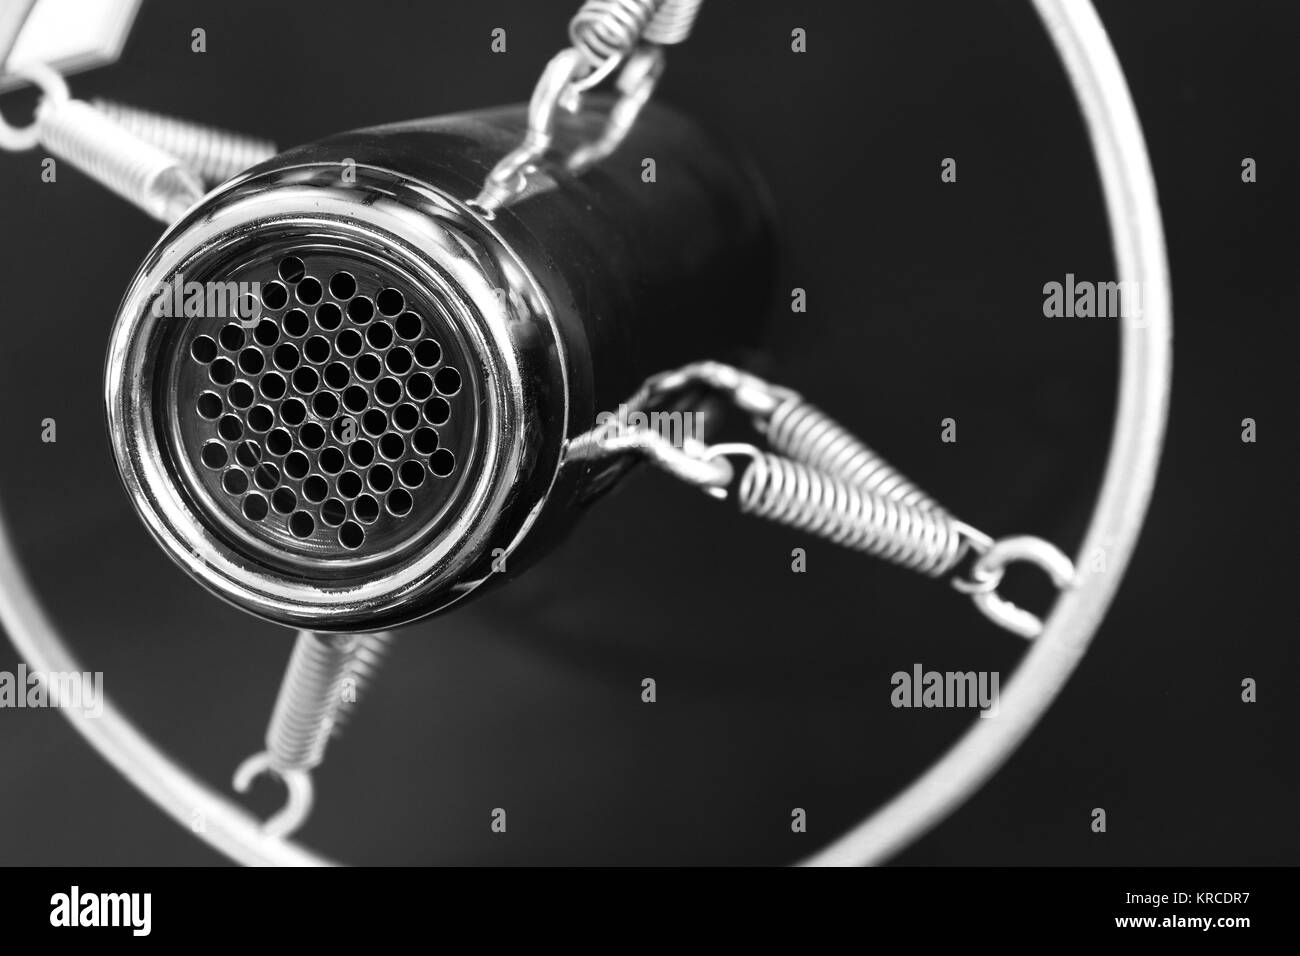 Vintage old round studio voice microphone, black and white Stock Photo